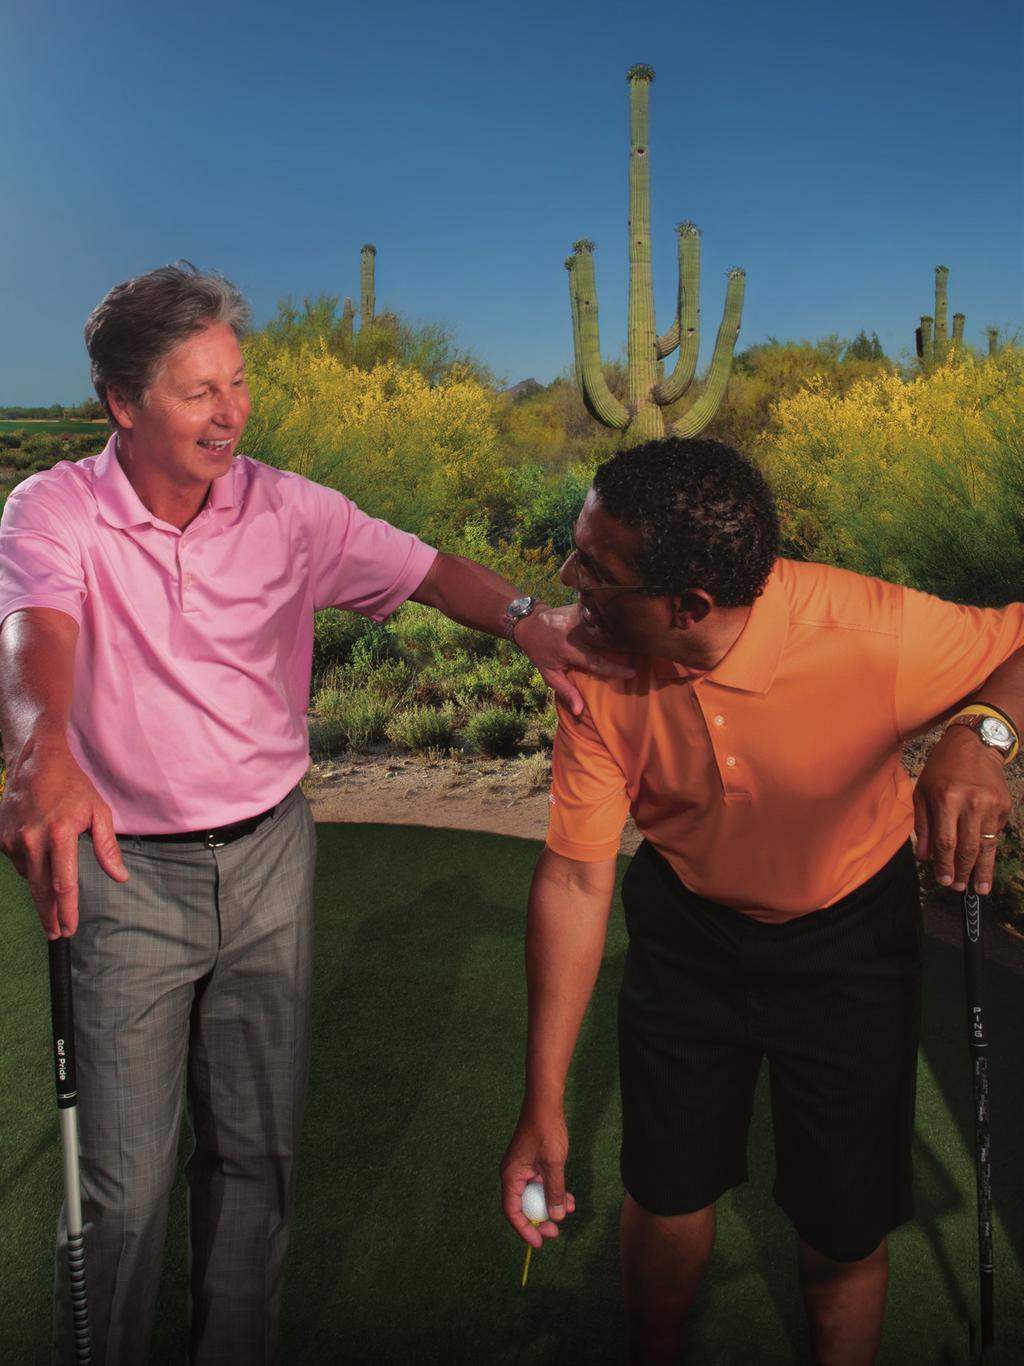 RULE FALL 2014 #9 BRANDEL S RULES FOR SCOTTSDALE GOLF FRIENDS DON T LET FRIENDS DRIVE...TWICE Hanging with your pals in Scottsdale is always a great time.